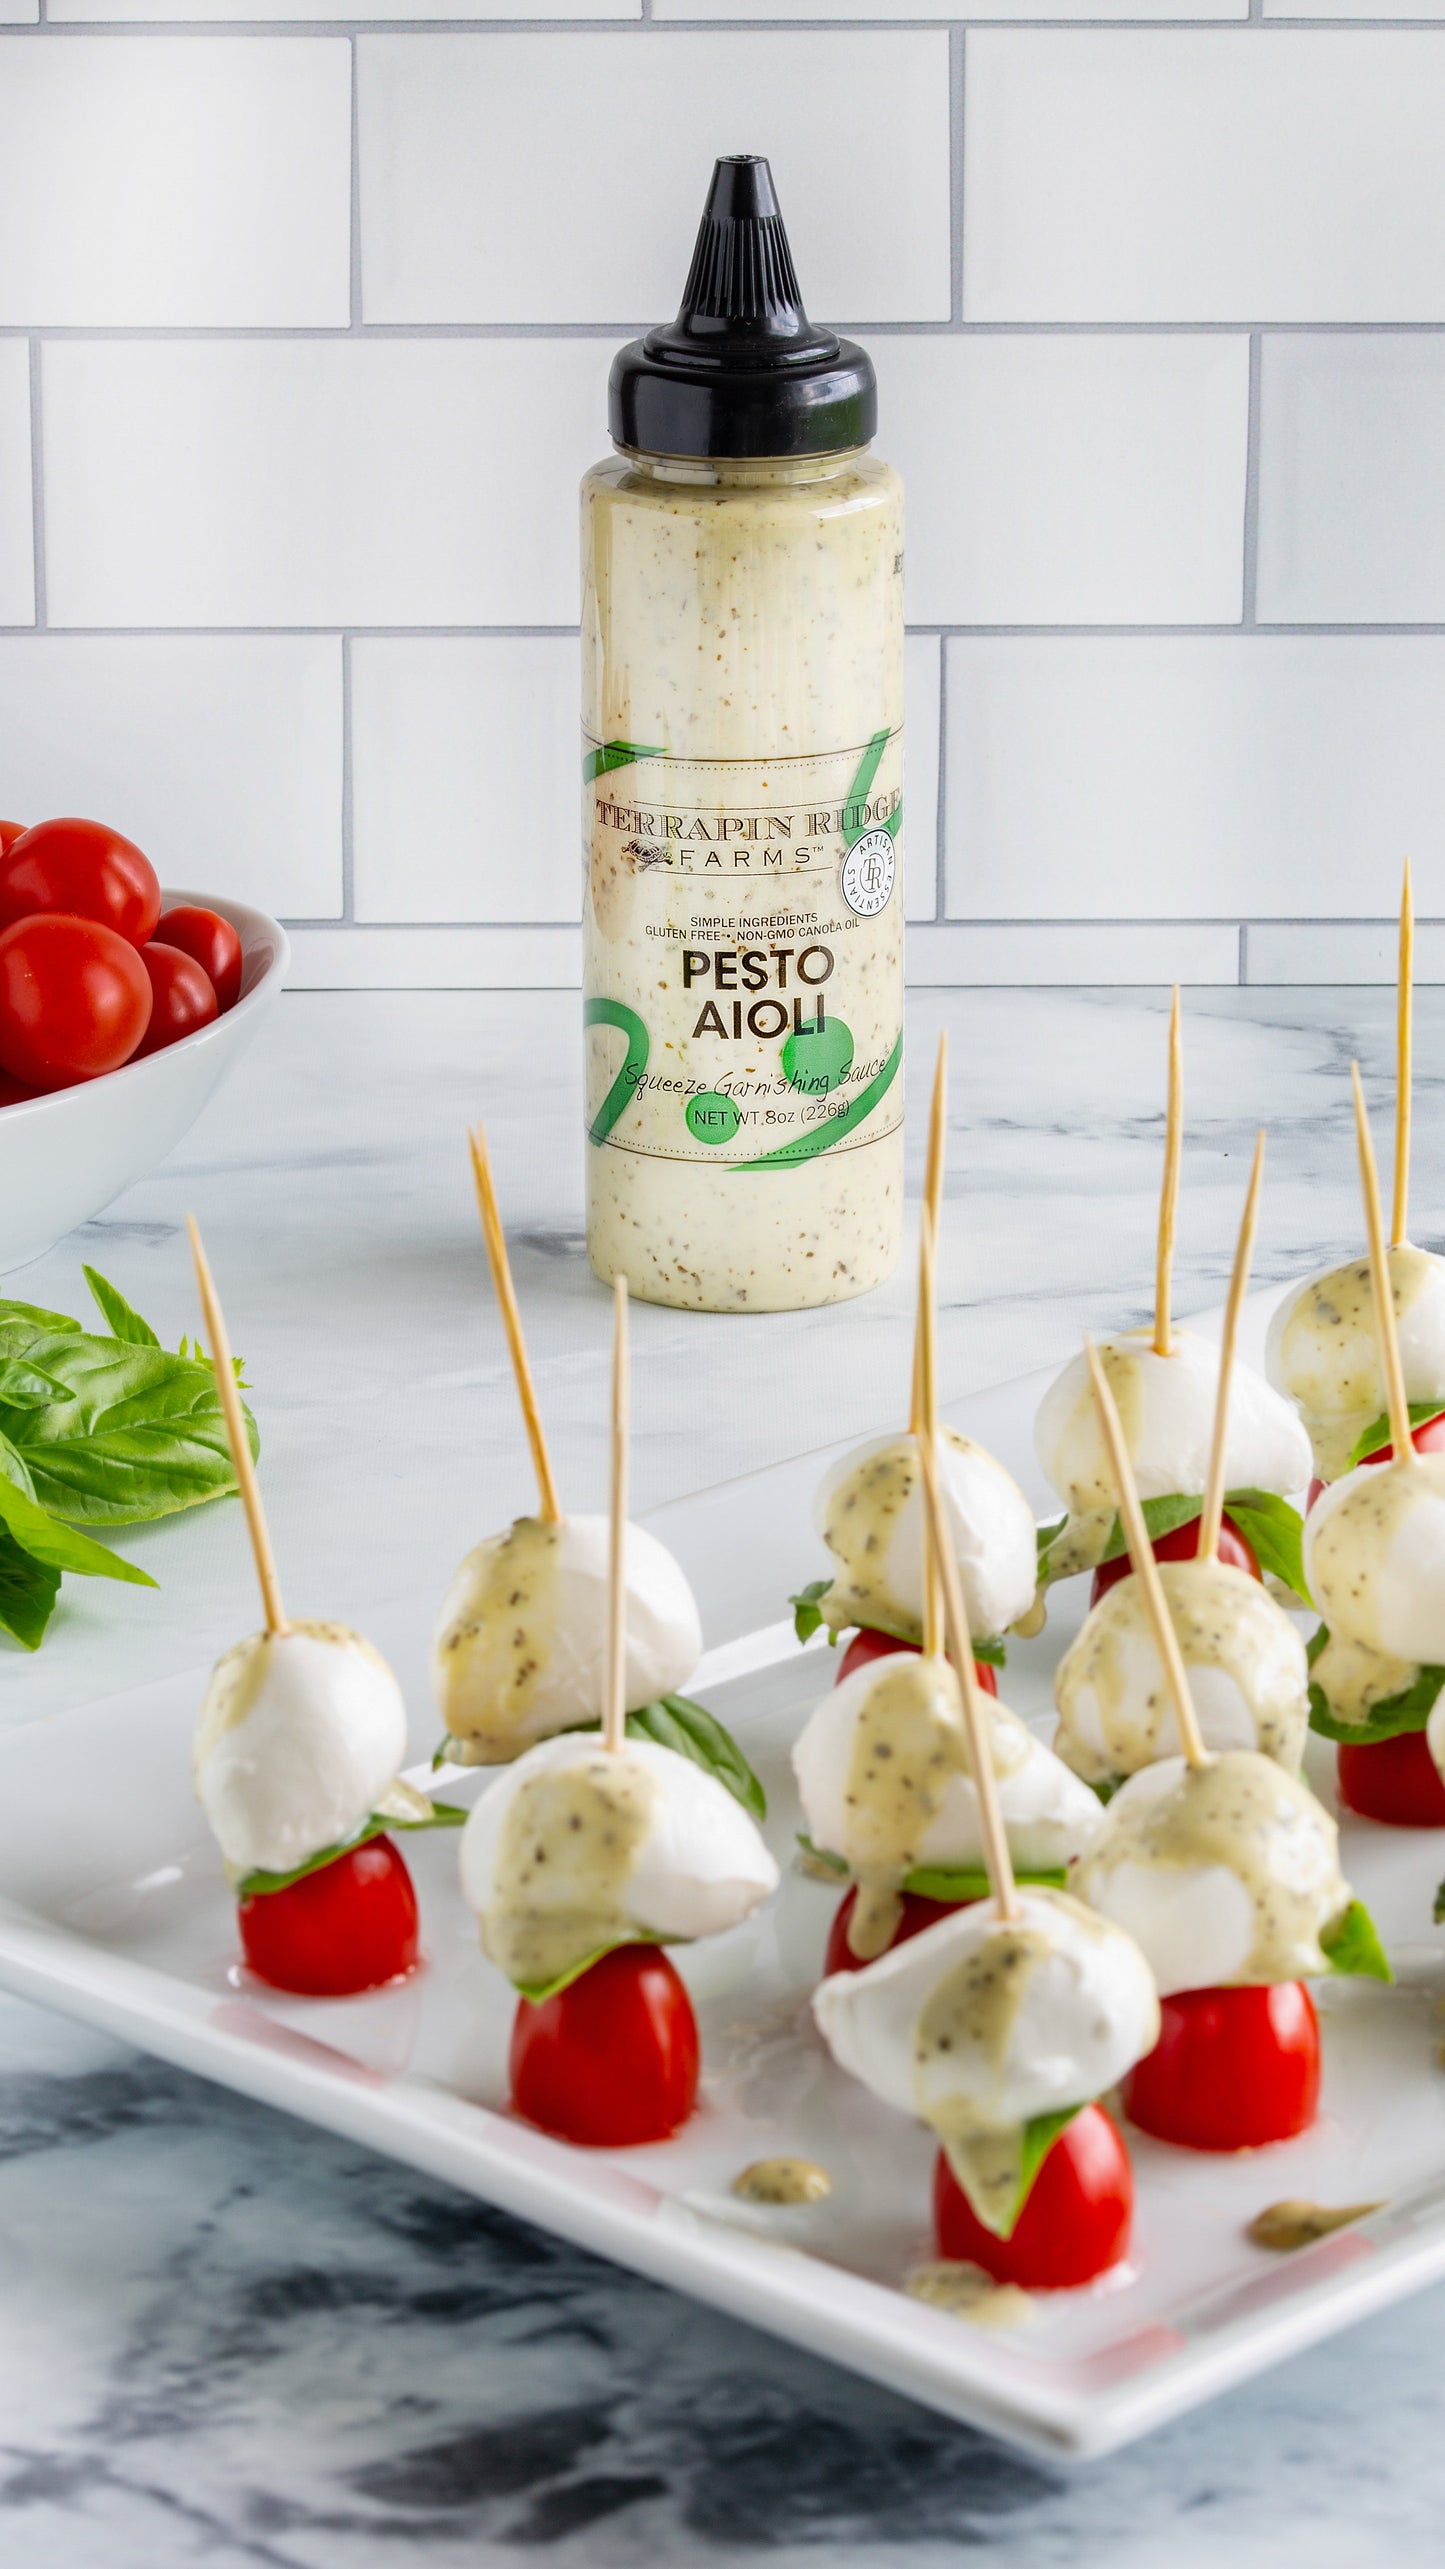 bottle of Pesto Aioli on a counter with a tray of tomato and cheese appetizers.